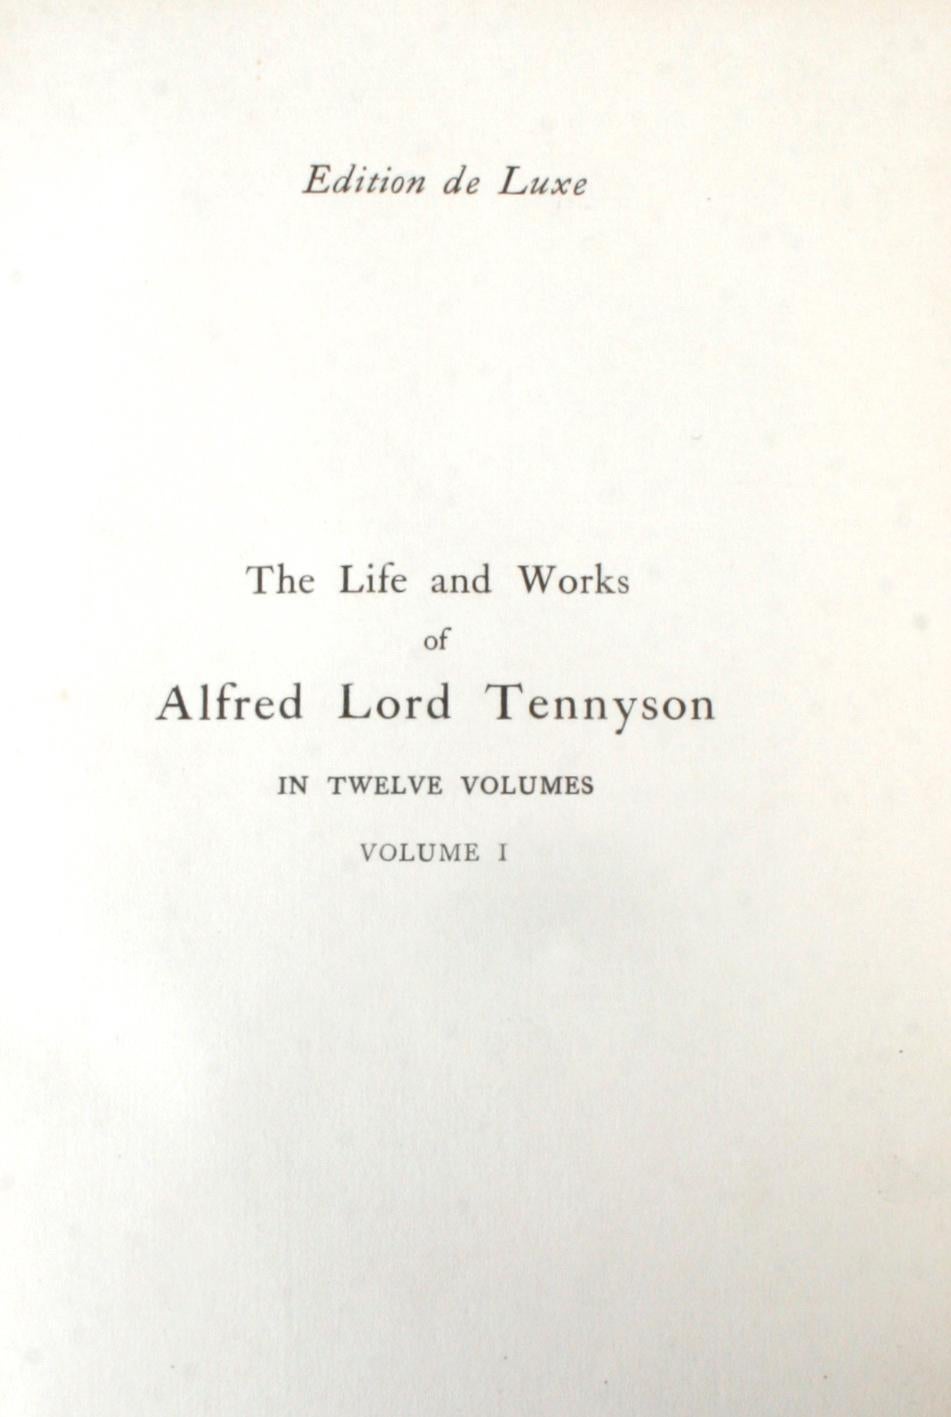 The Life and Works of Alfred Lord Tennyson in Twelve Volumes, Limited Edition. London: MacMillian and Co., Limited, 1898. Moroccan leather and paper bound gilt hardcovers with gilt top edges. A set of 12 antique leather bound books of the works of